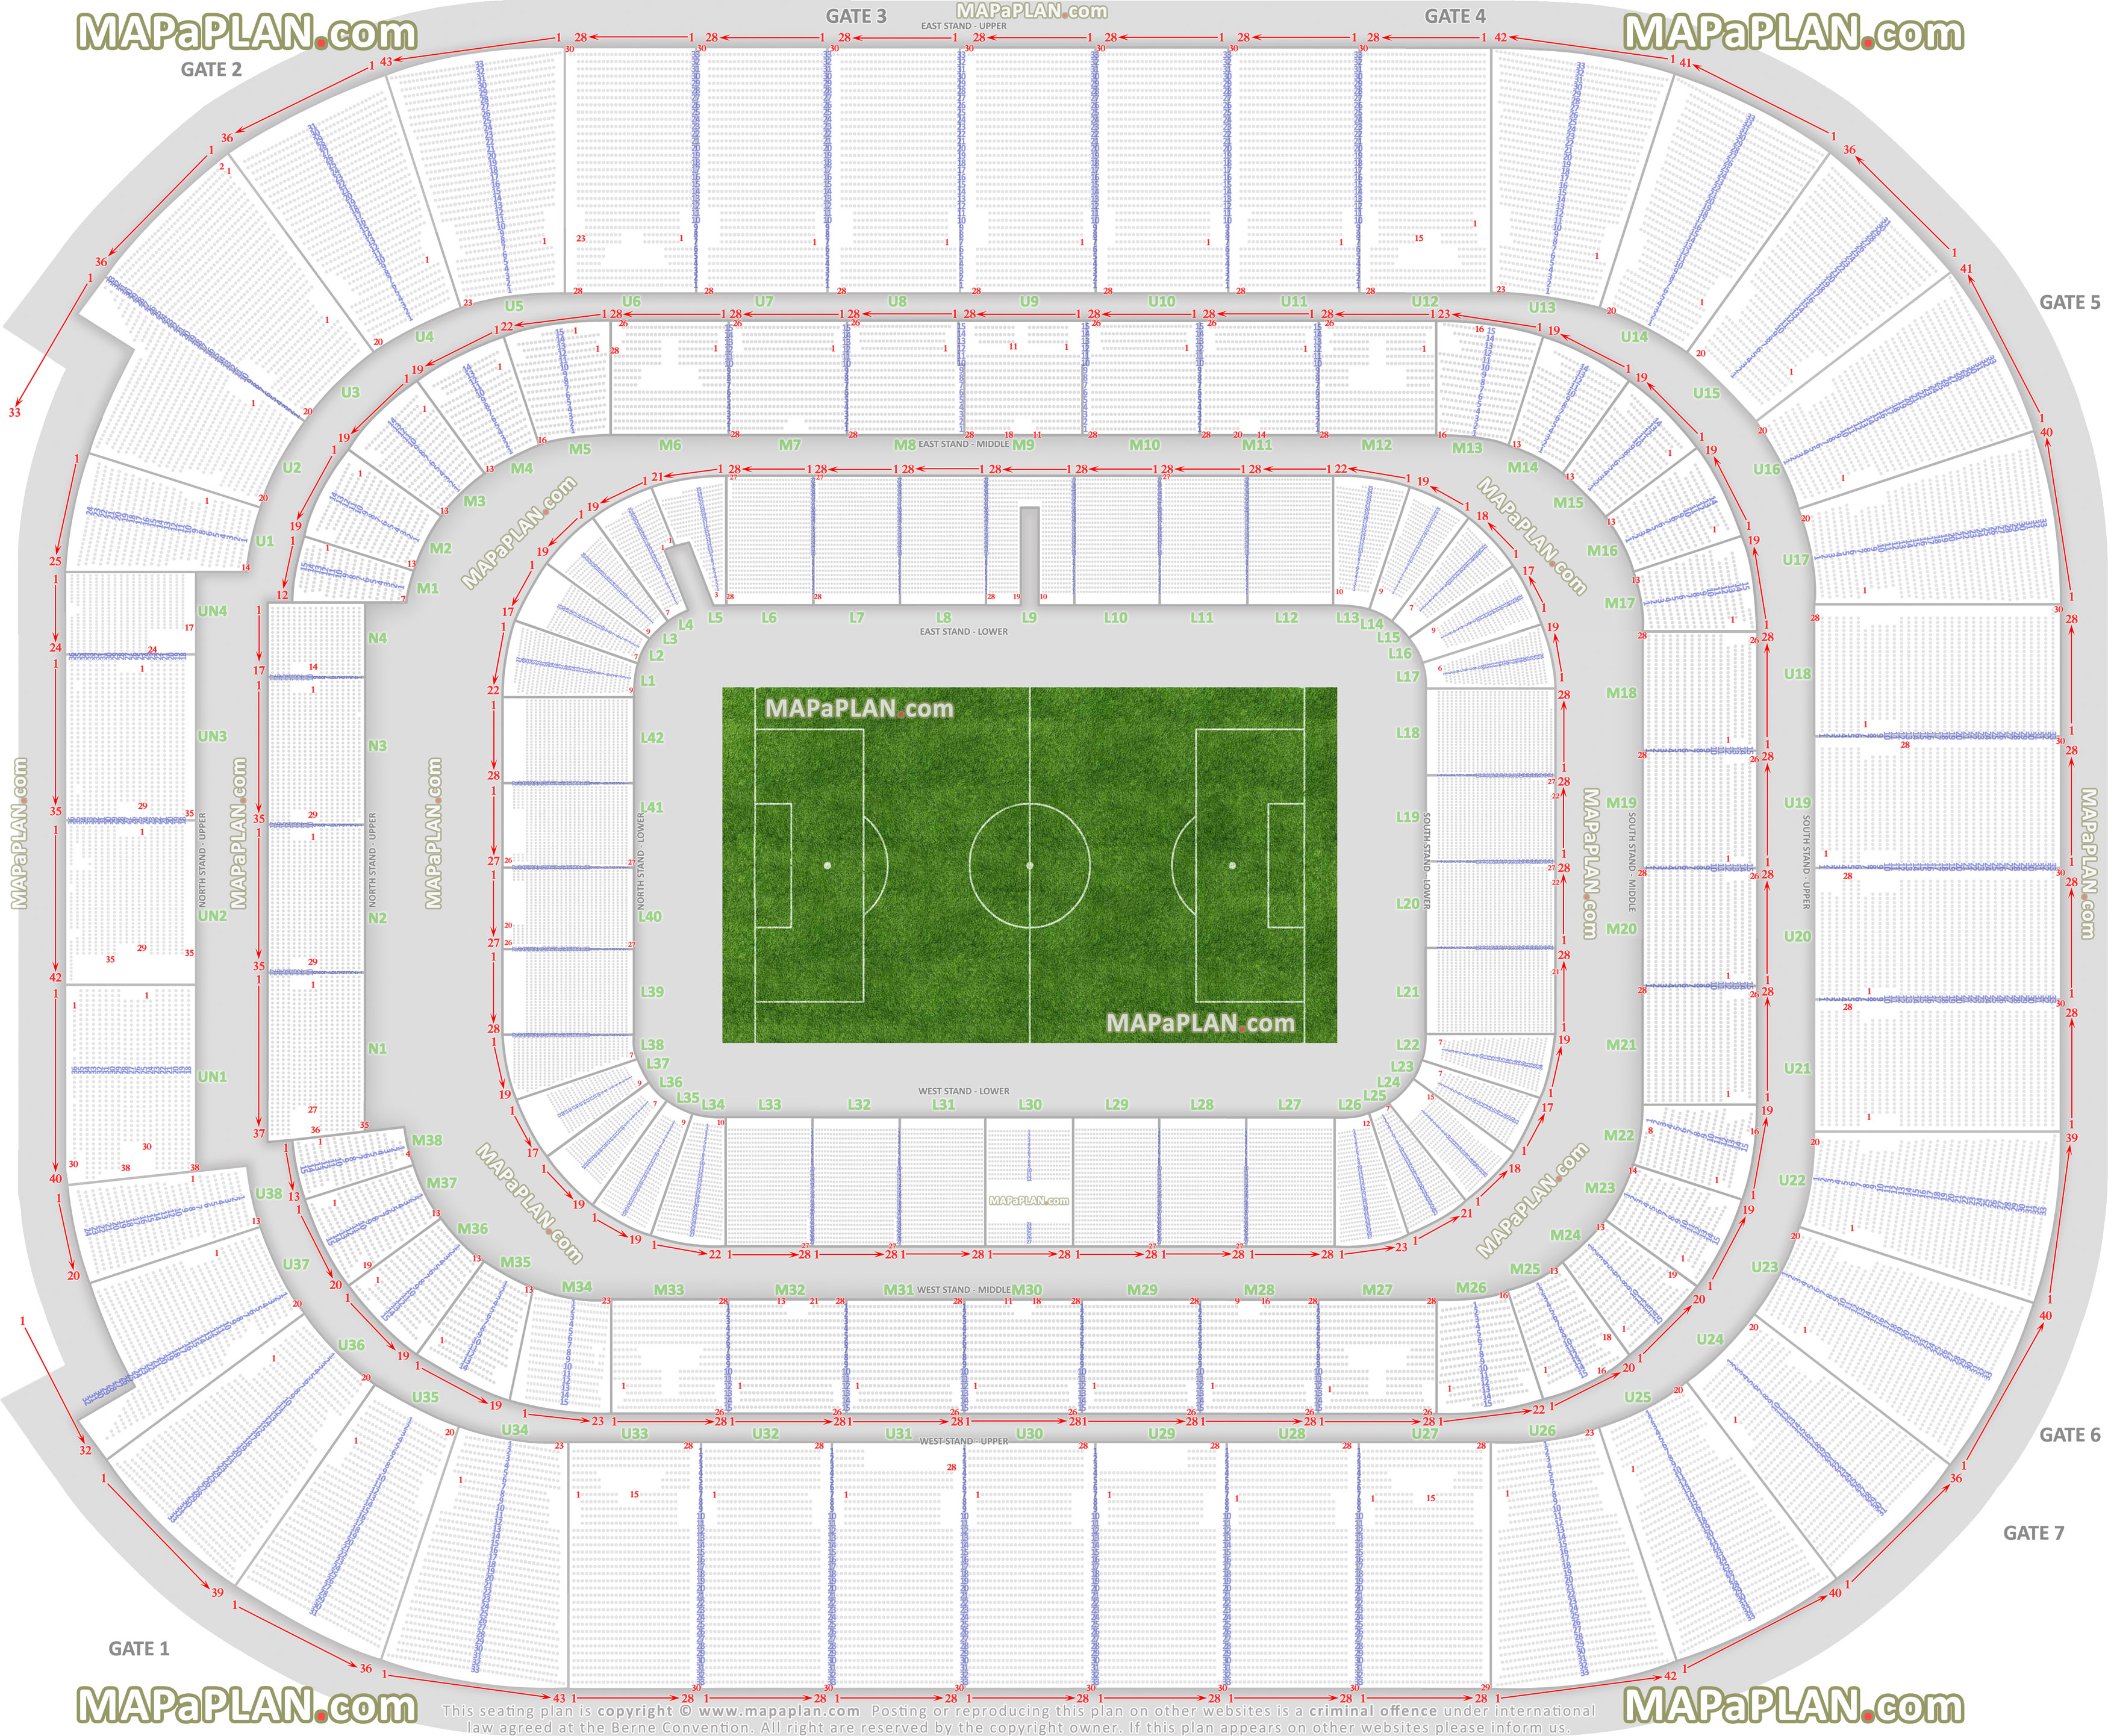 wales football game chart find my seat guide block row seat gate arrangement Cardiff Millennium Stadium seating plan